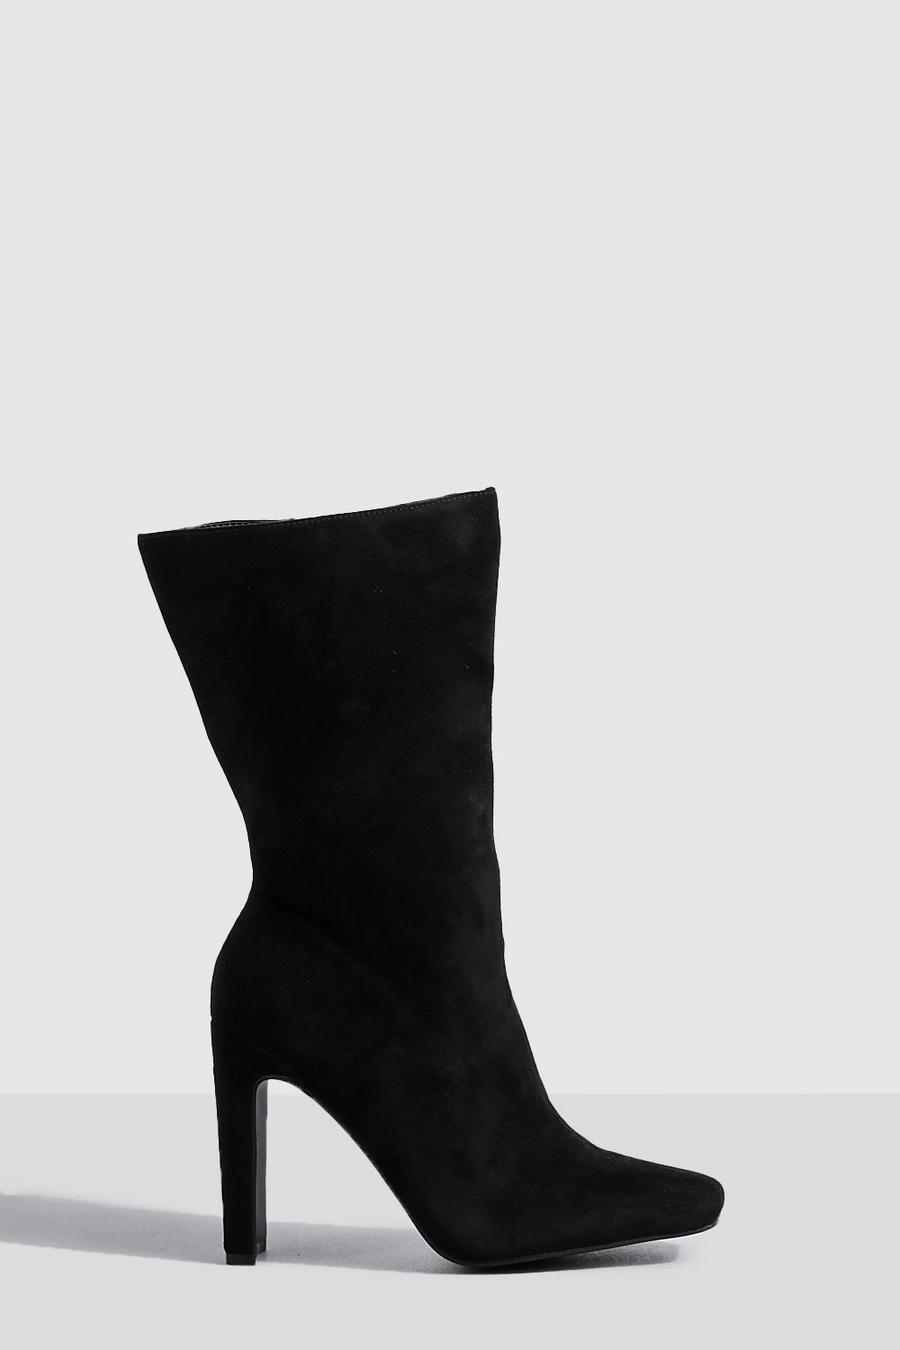 Black Wide Fit Flat Heel Faux Suede Calf High Boots  